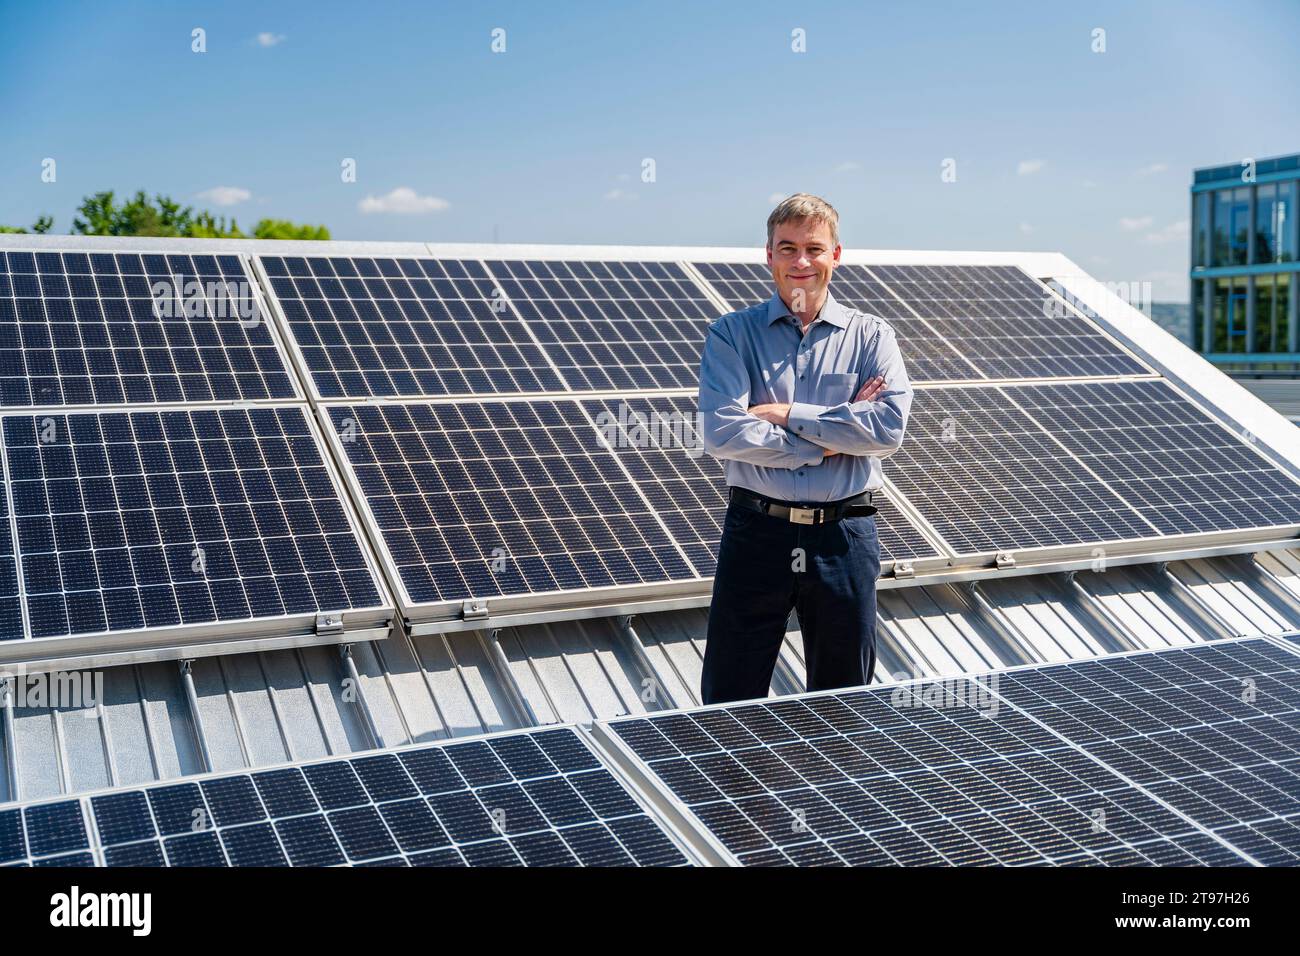 A self-assured businessman stands proudly surrounded by rows of gleaming solar panels Stock Photo